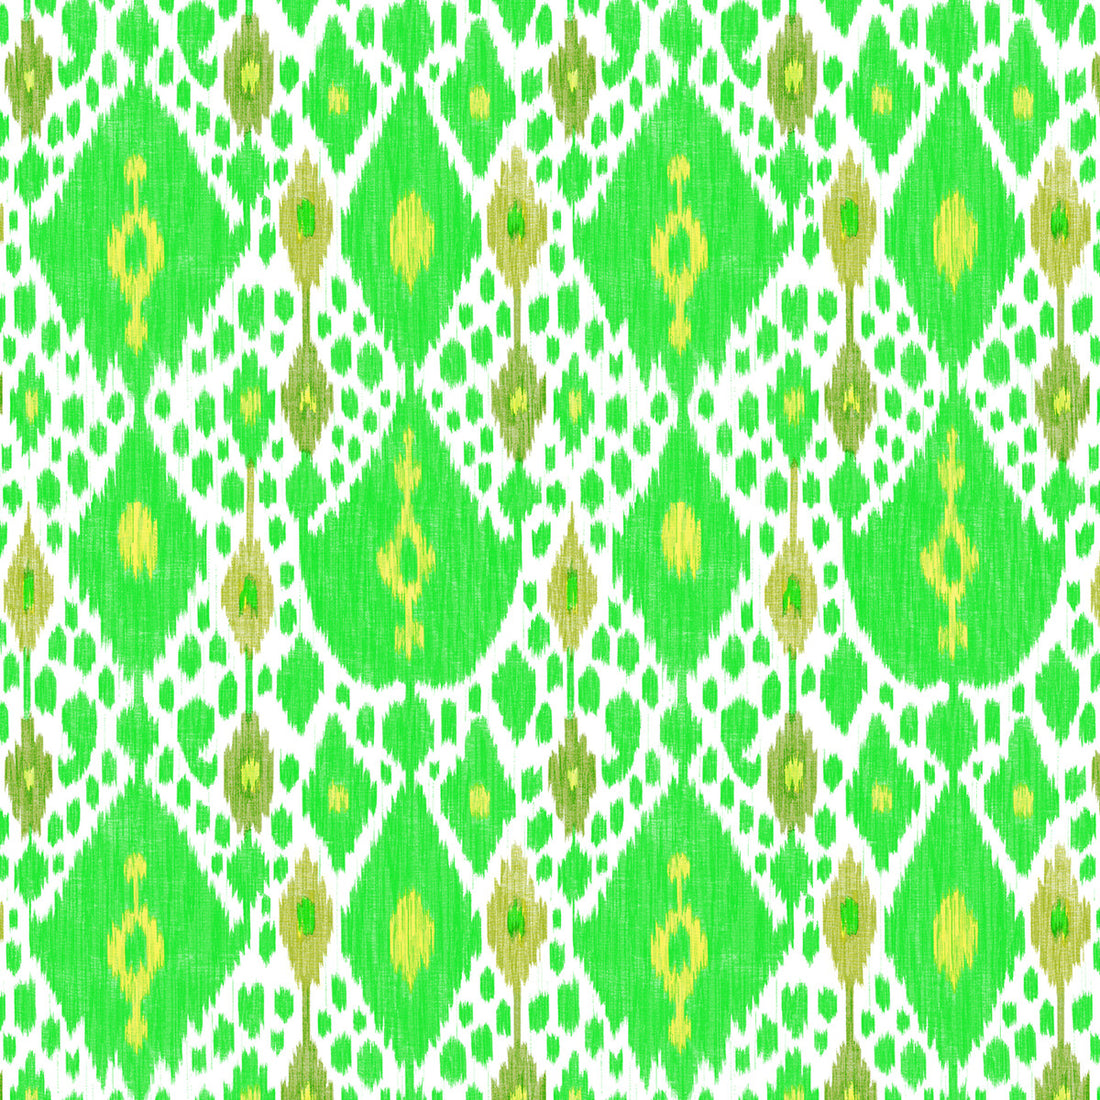 Ikat fabric in verde color - pattern GDT5542.002.0 - by Gaston y Daniela in the Gaston Libreria collection